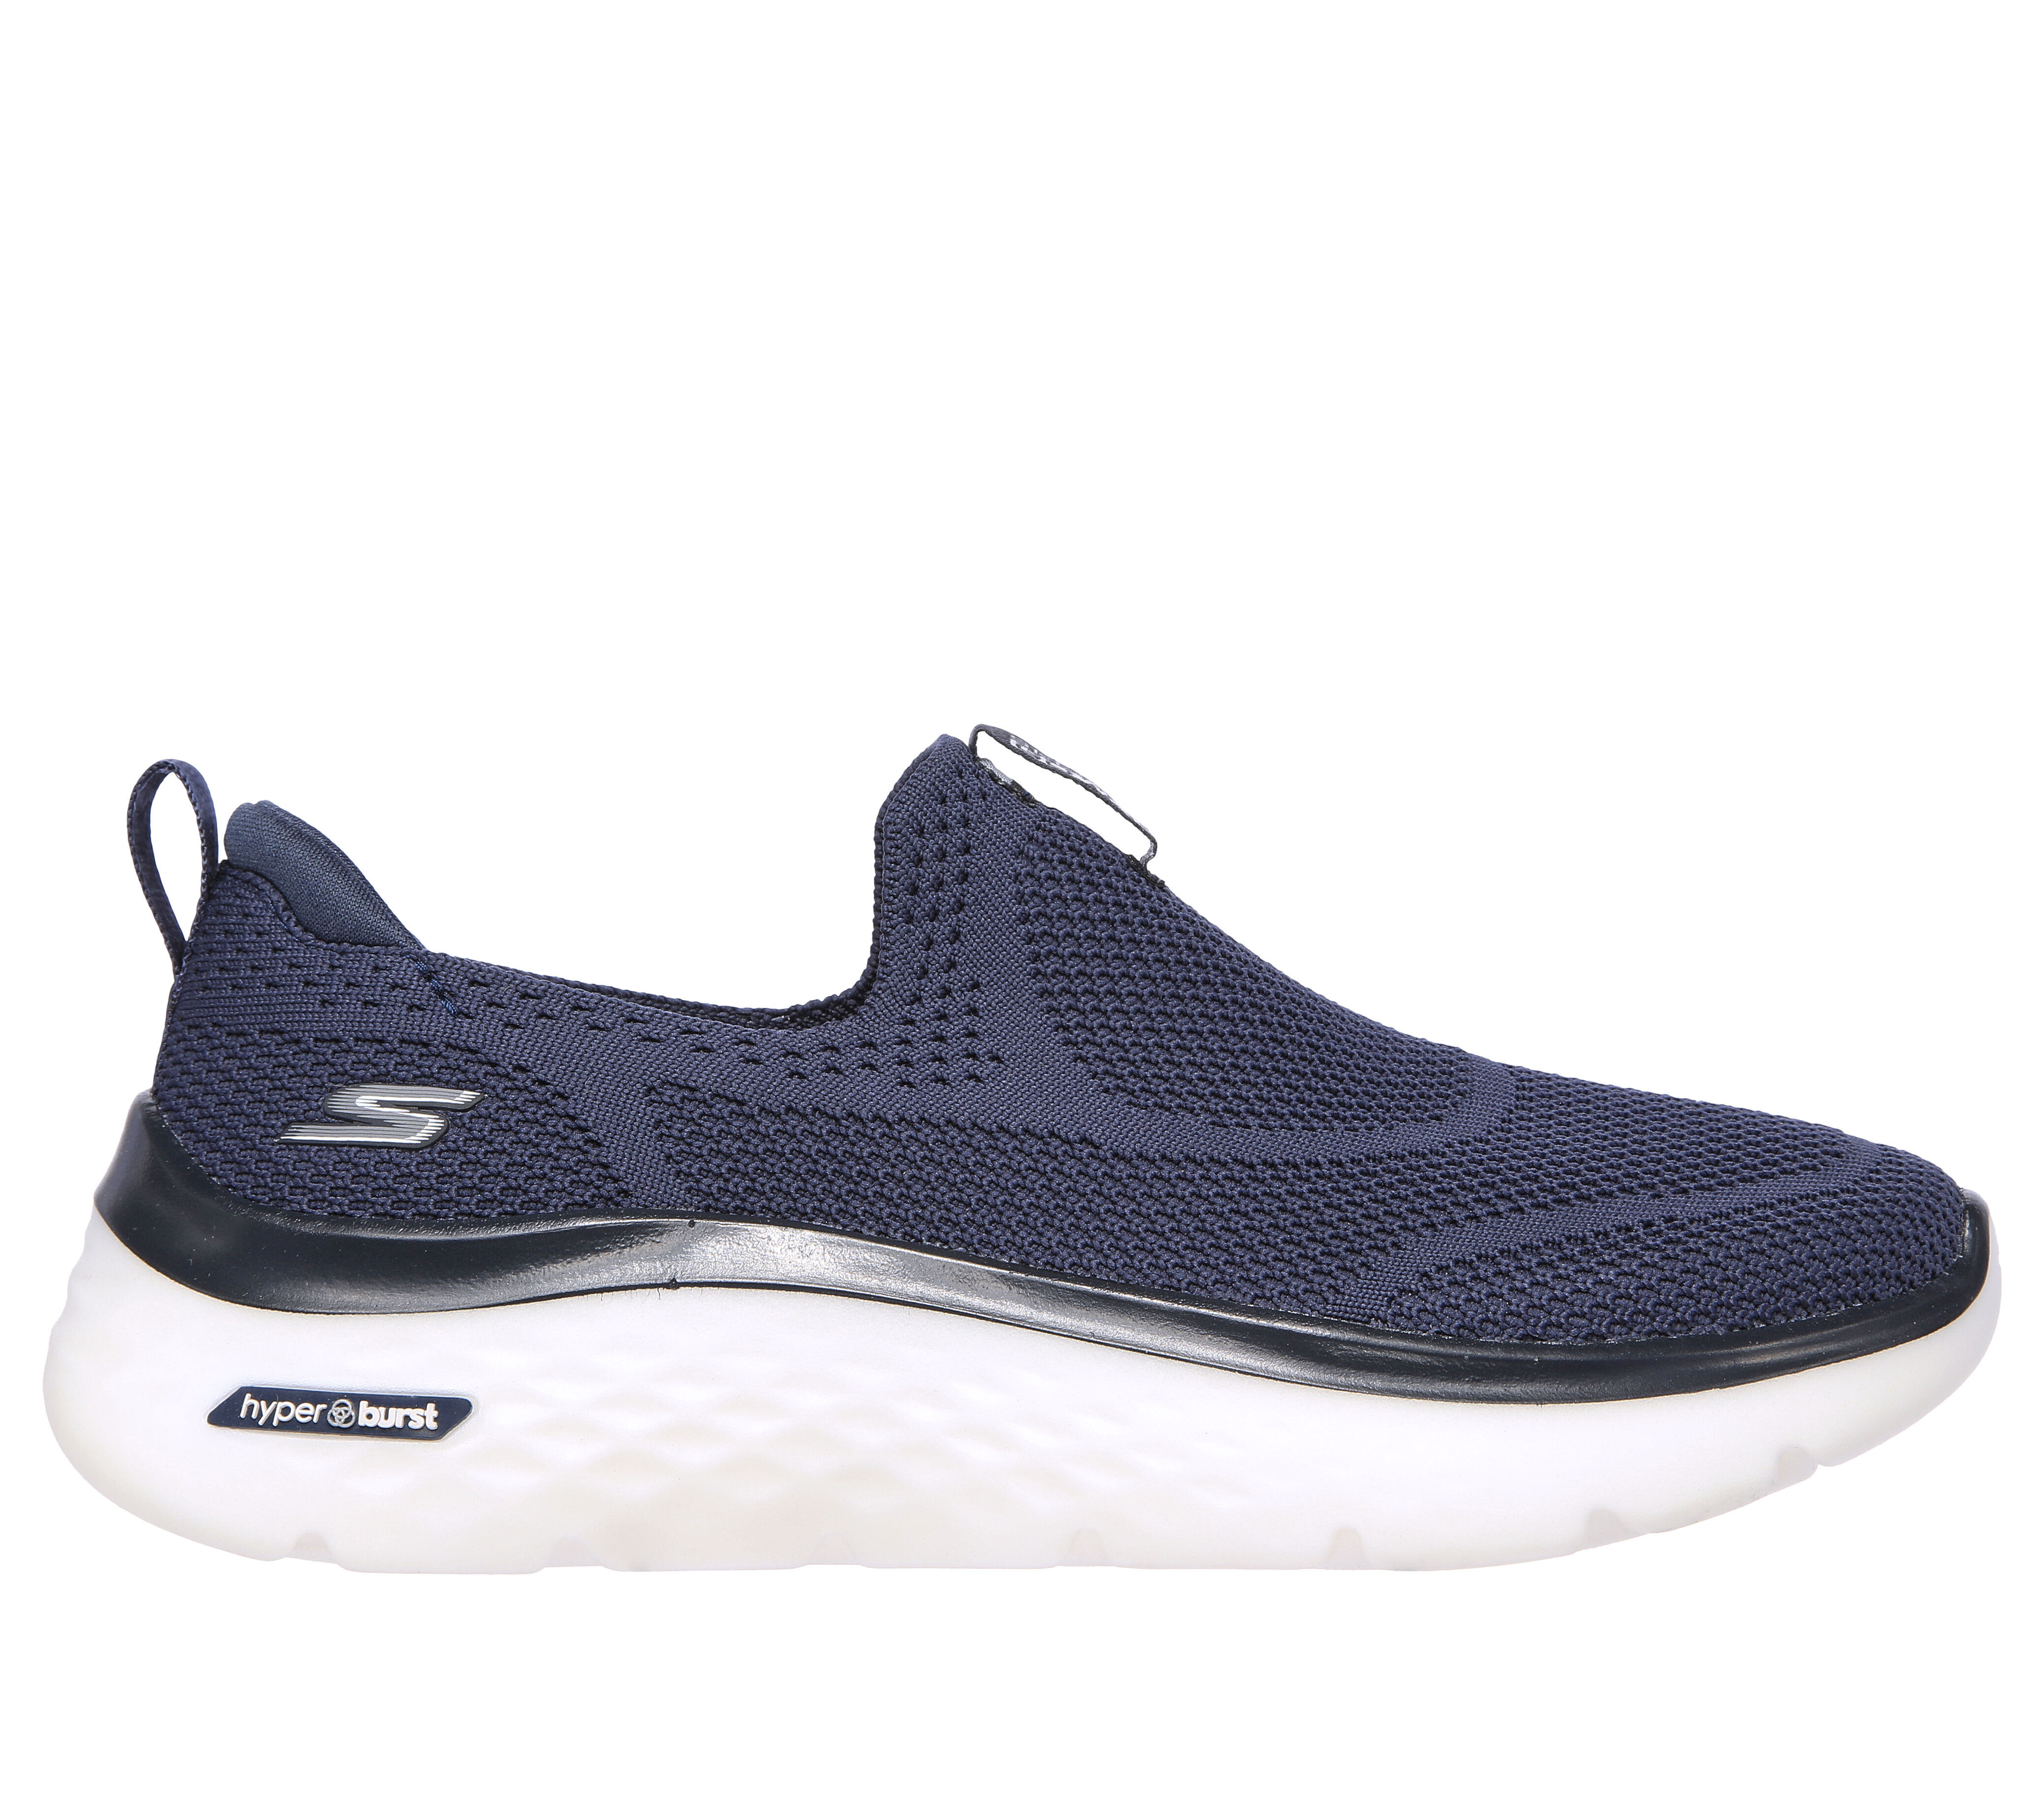 Most Comfortable Skechers Walk SAVE 45% - aveclumiere.com